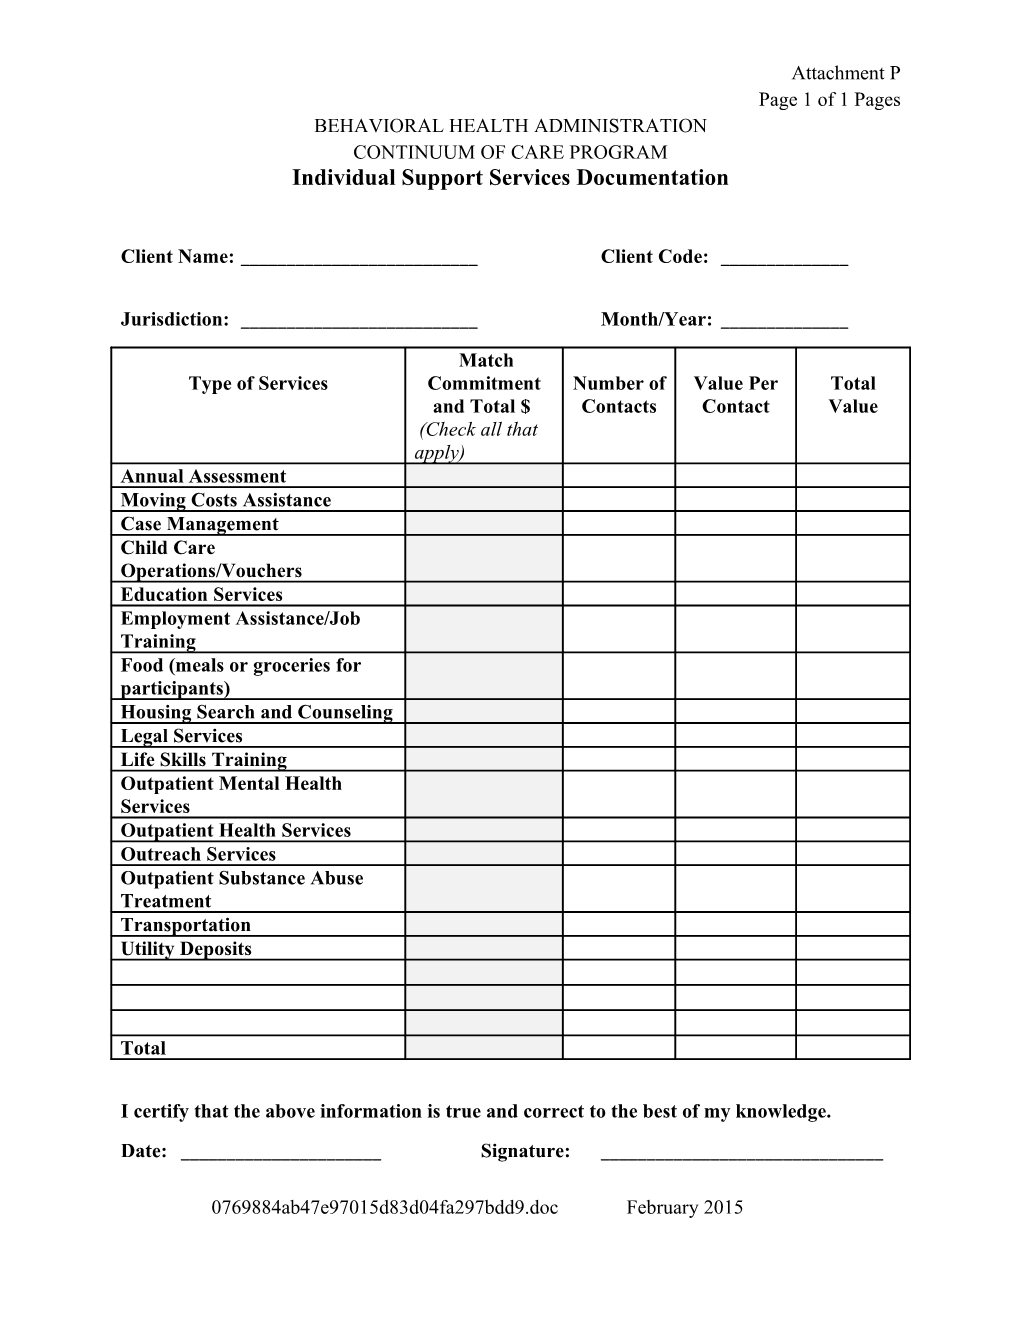 Individual Support Services Documentation